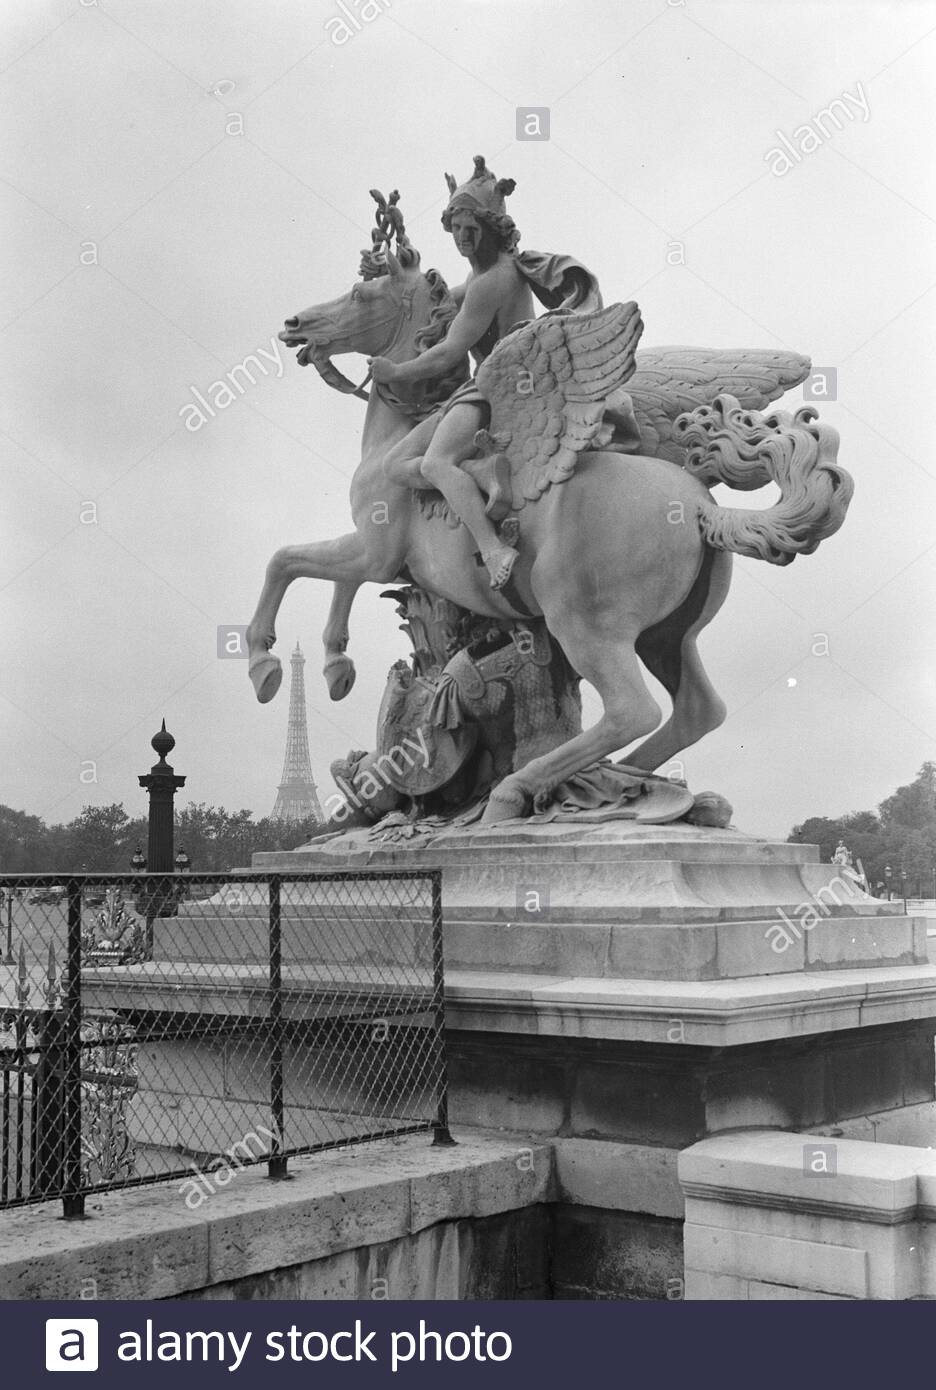 reportage paris description image mercure at the entrance of the jardin des tuileries annotation the sculptures mercure and la renomme are by antoine coysevox 1640 1720 they were placed in 1719 at the western entrance of the tuileries date 1935 location france paris keywords sculptures 2APE9X1